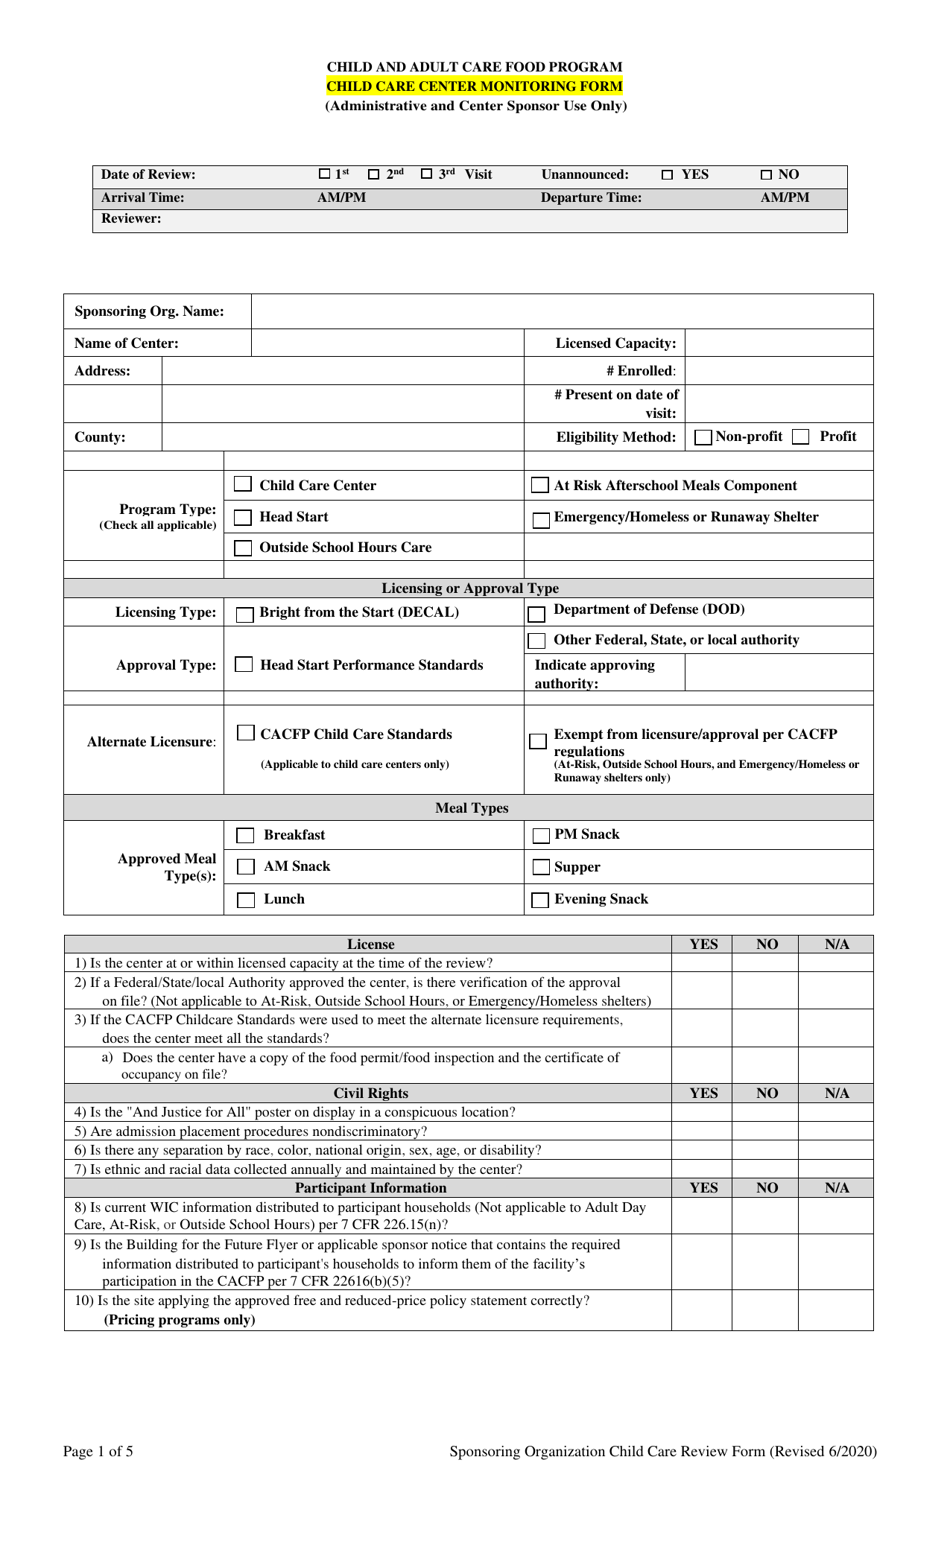 Child Care Center Monitoring Form (Administrative and Center Sponsor Use Only) - Georgia (United States), Page 1